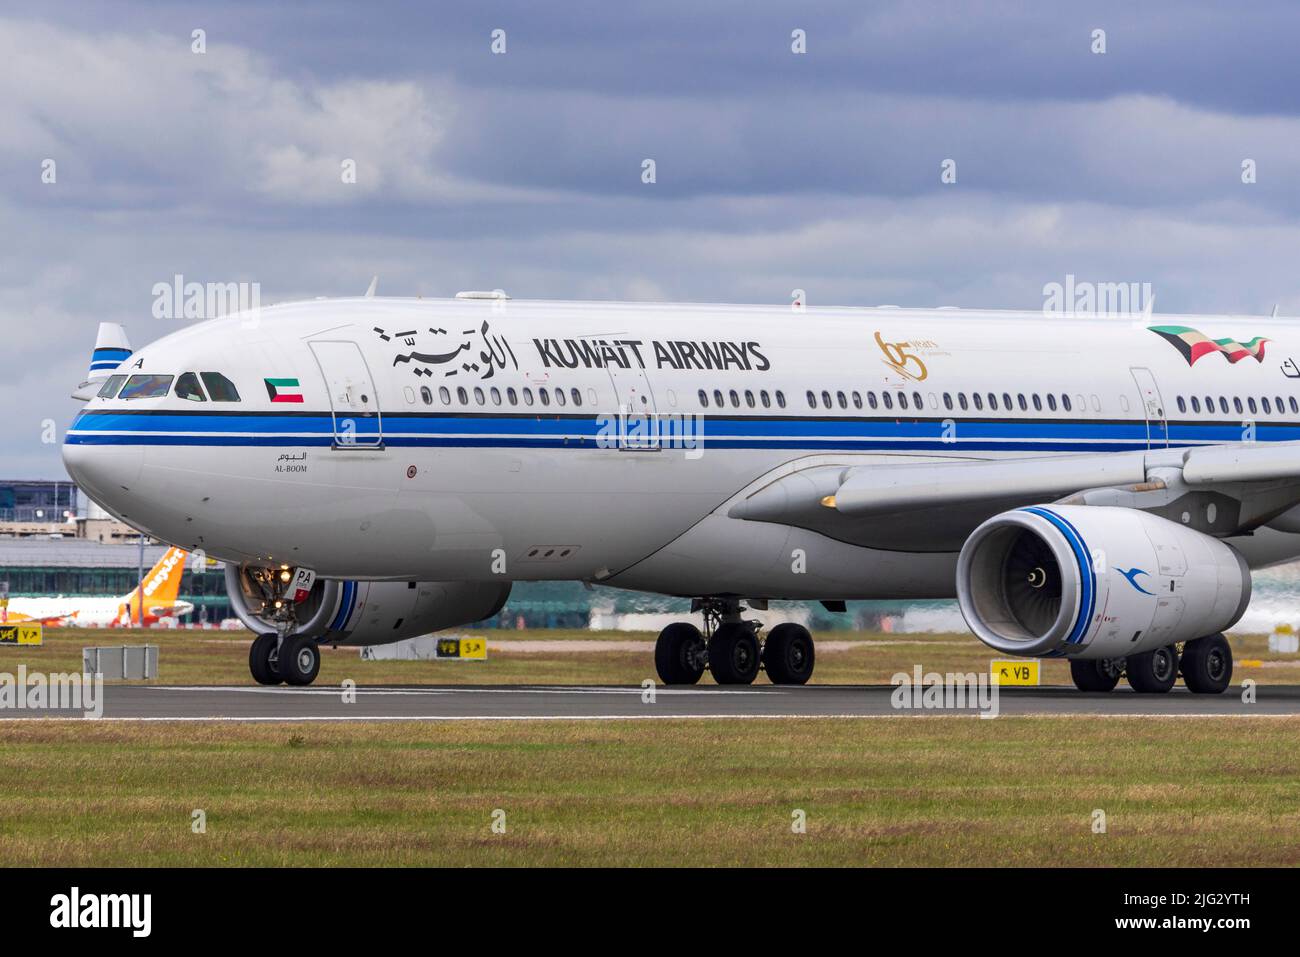 Kuwait Airways Airbus A330-243. Al Boom at Manchester airport. Stock Photo